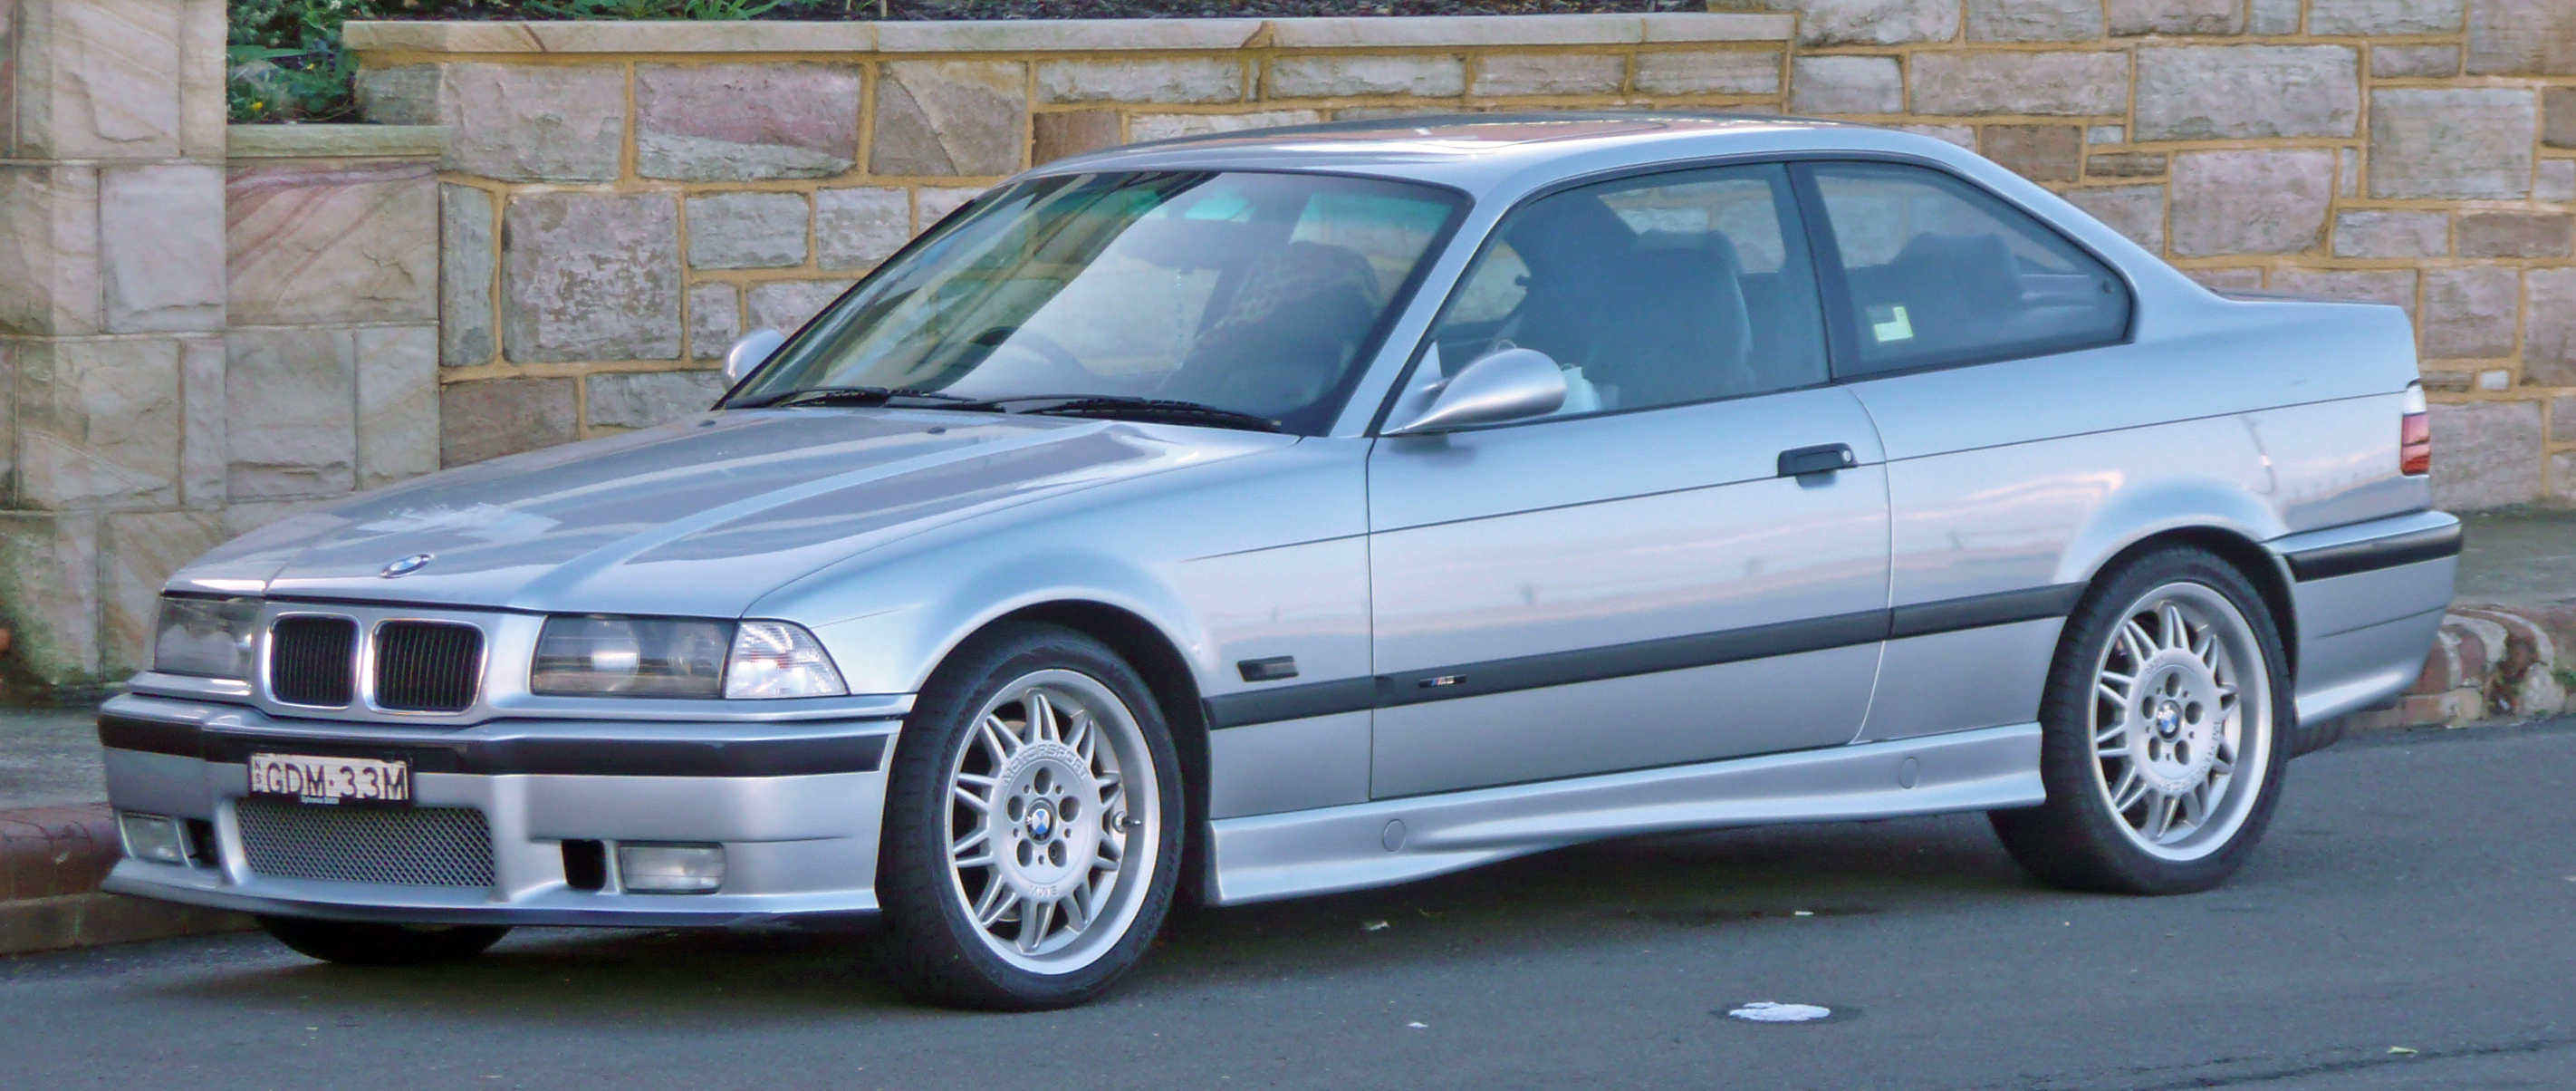 Images of Bmw E36 | 2844x1204